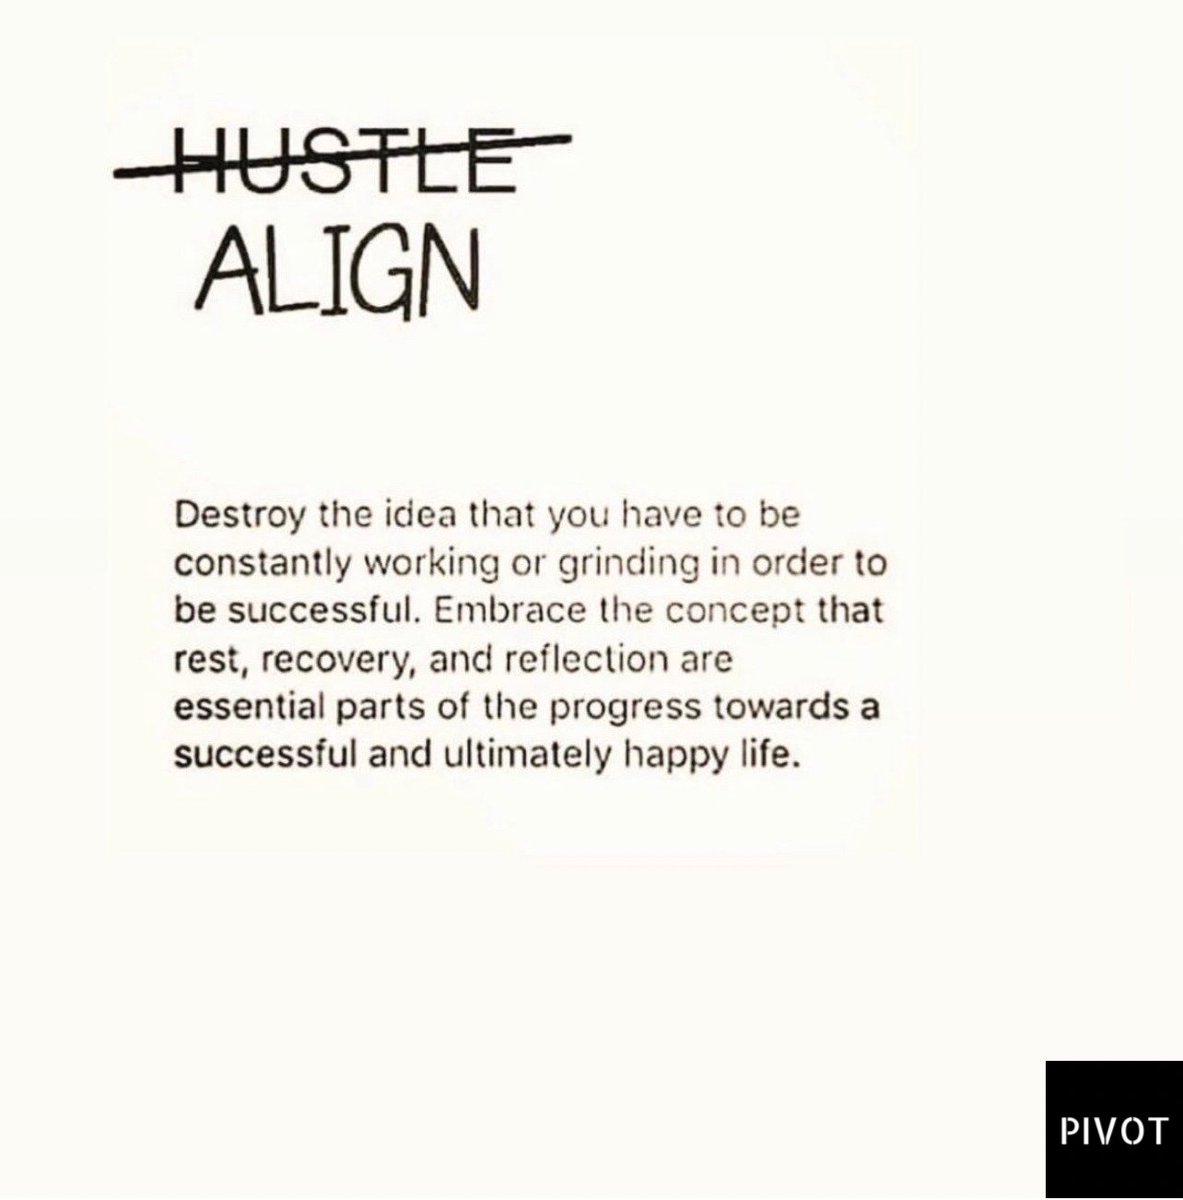 Before you come for us hear us out. We’re not saying not to hustle, we’re saying listen to your mind and body. Take some time to ensure you’re aligned.

Rest, recover, reassess, game plan, execute. Stay ready so you don’t have to get ready.

pivot-watches.com #AdaptToChange